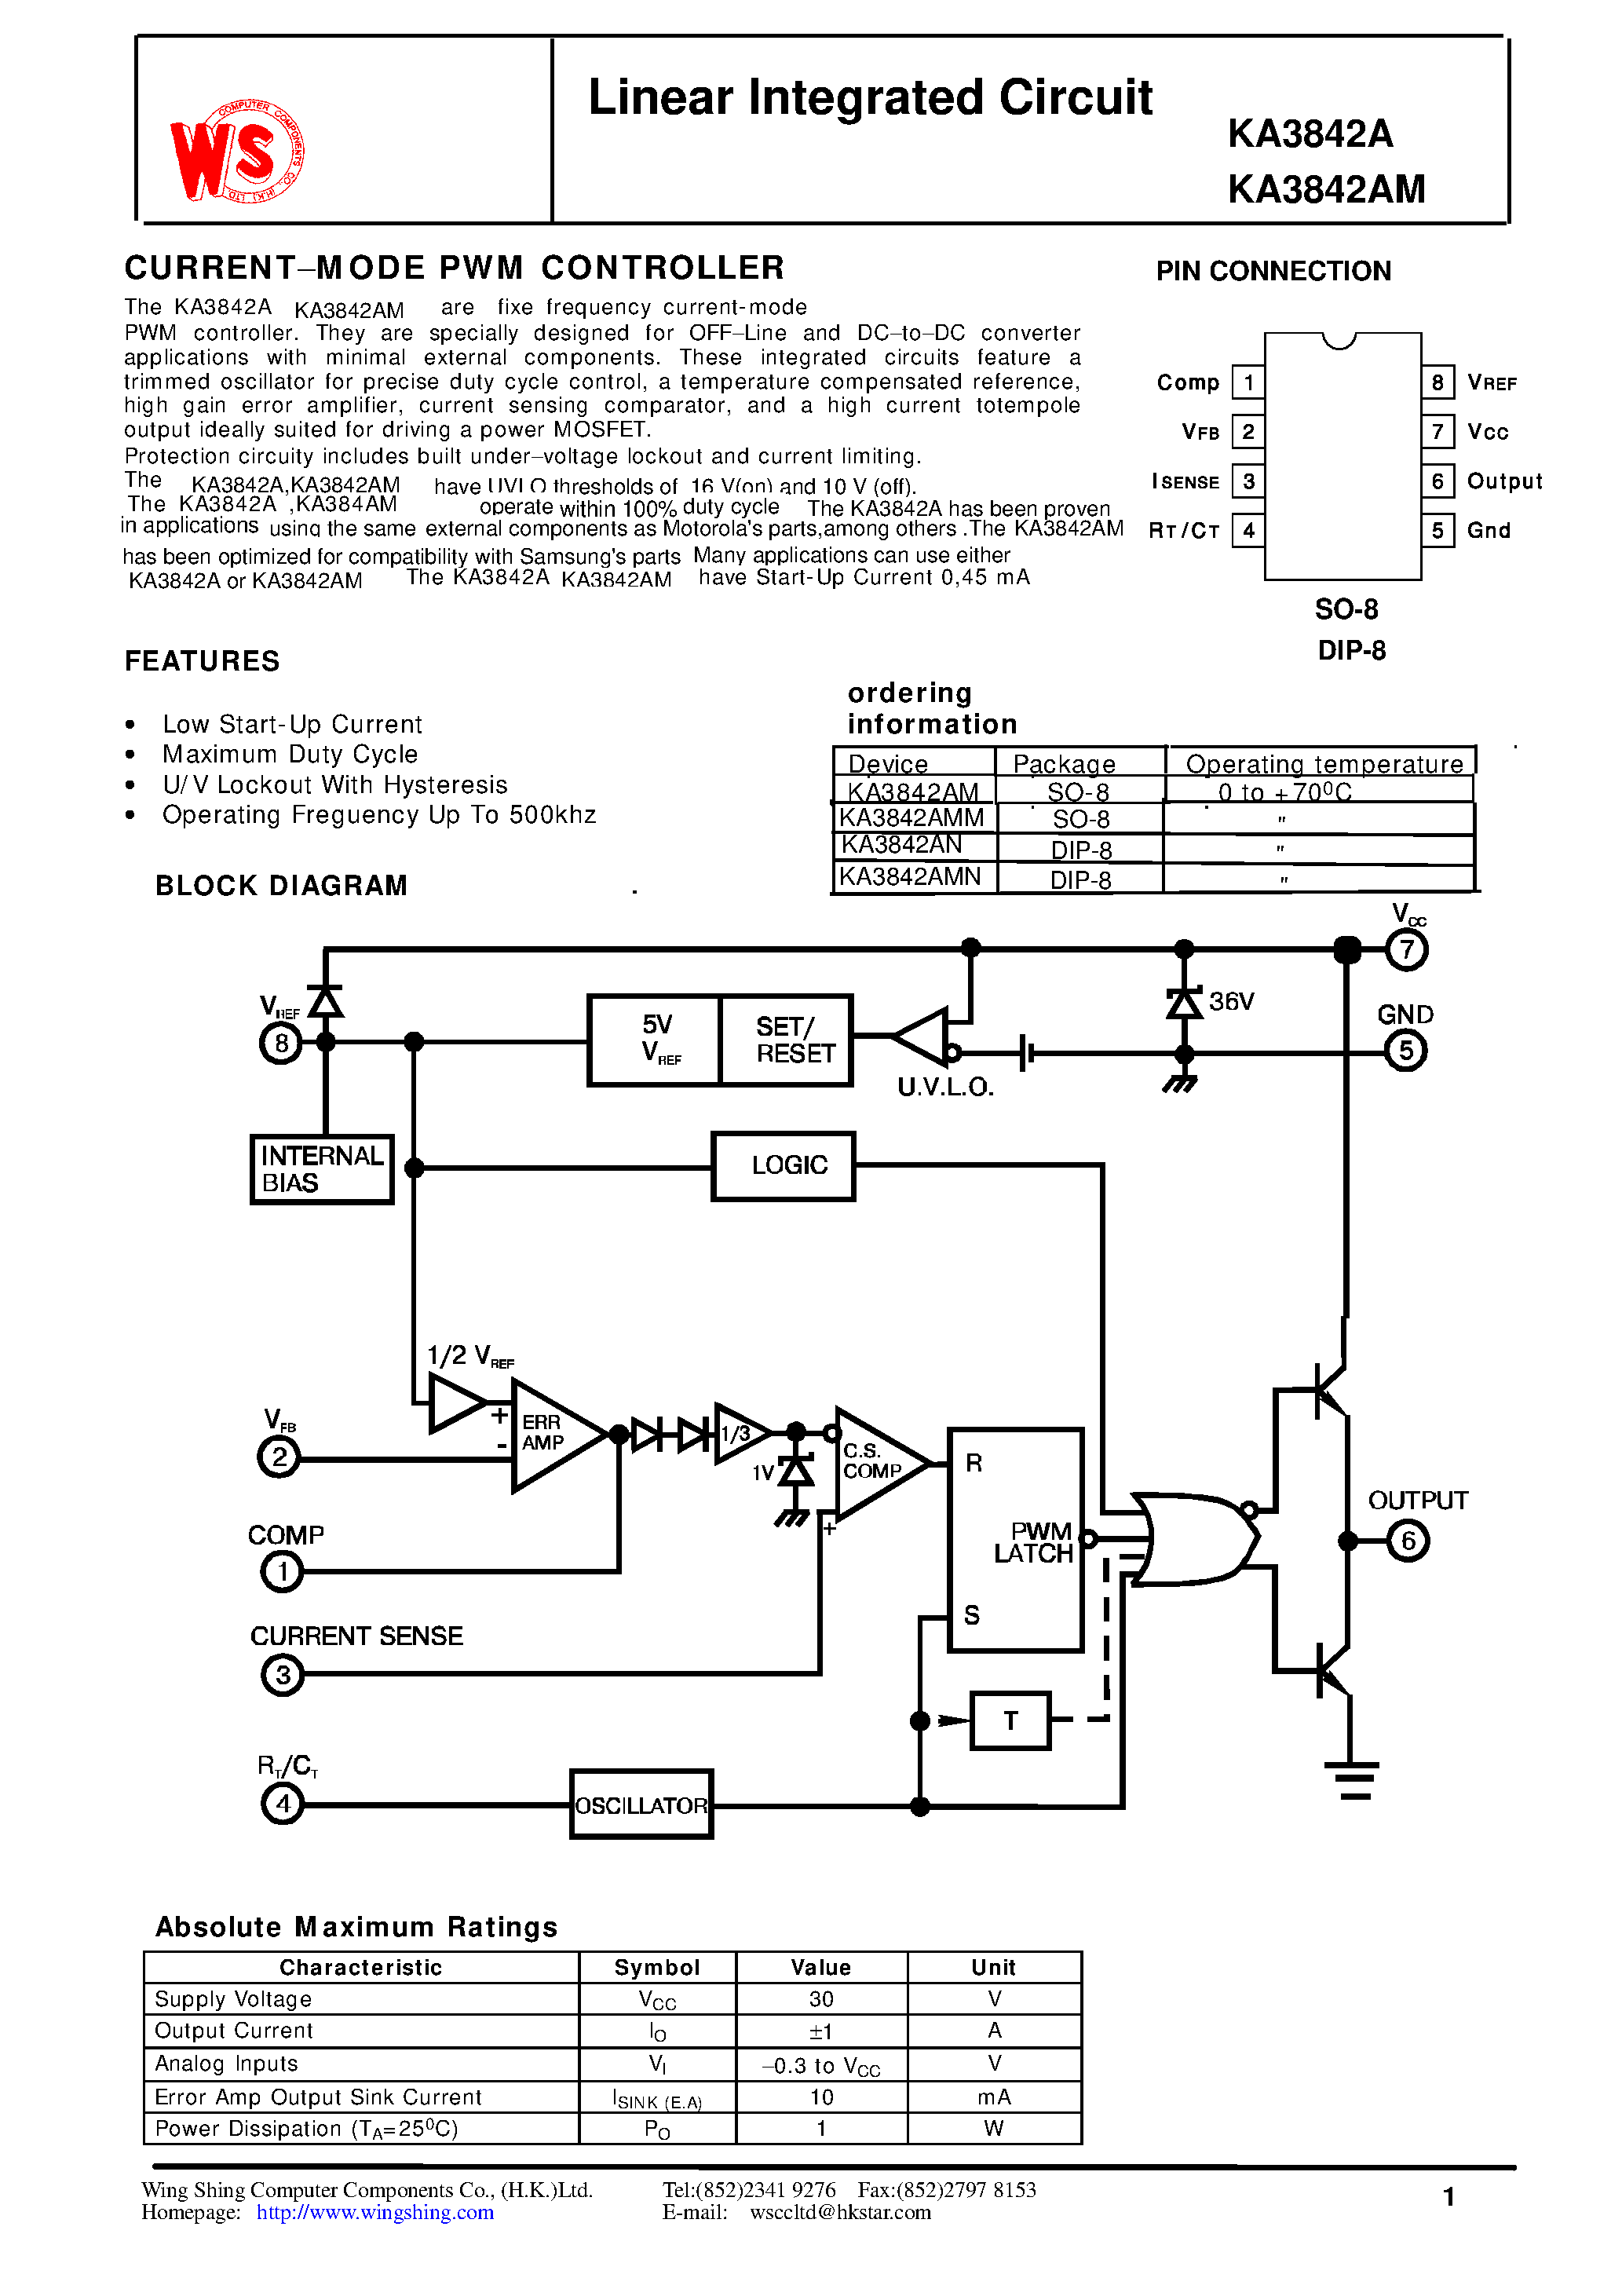 Datasheet KA3842 - Linear Integrated Circuit(CURRENT-MODE PWM CONTROLLER) page 1